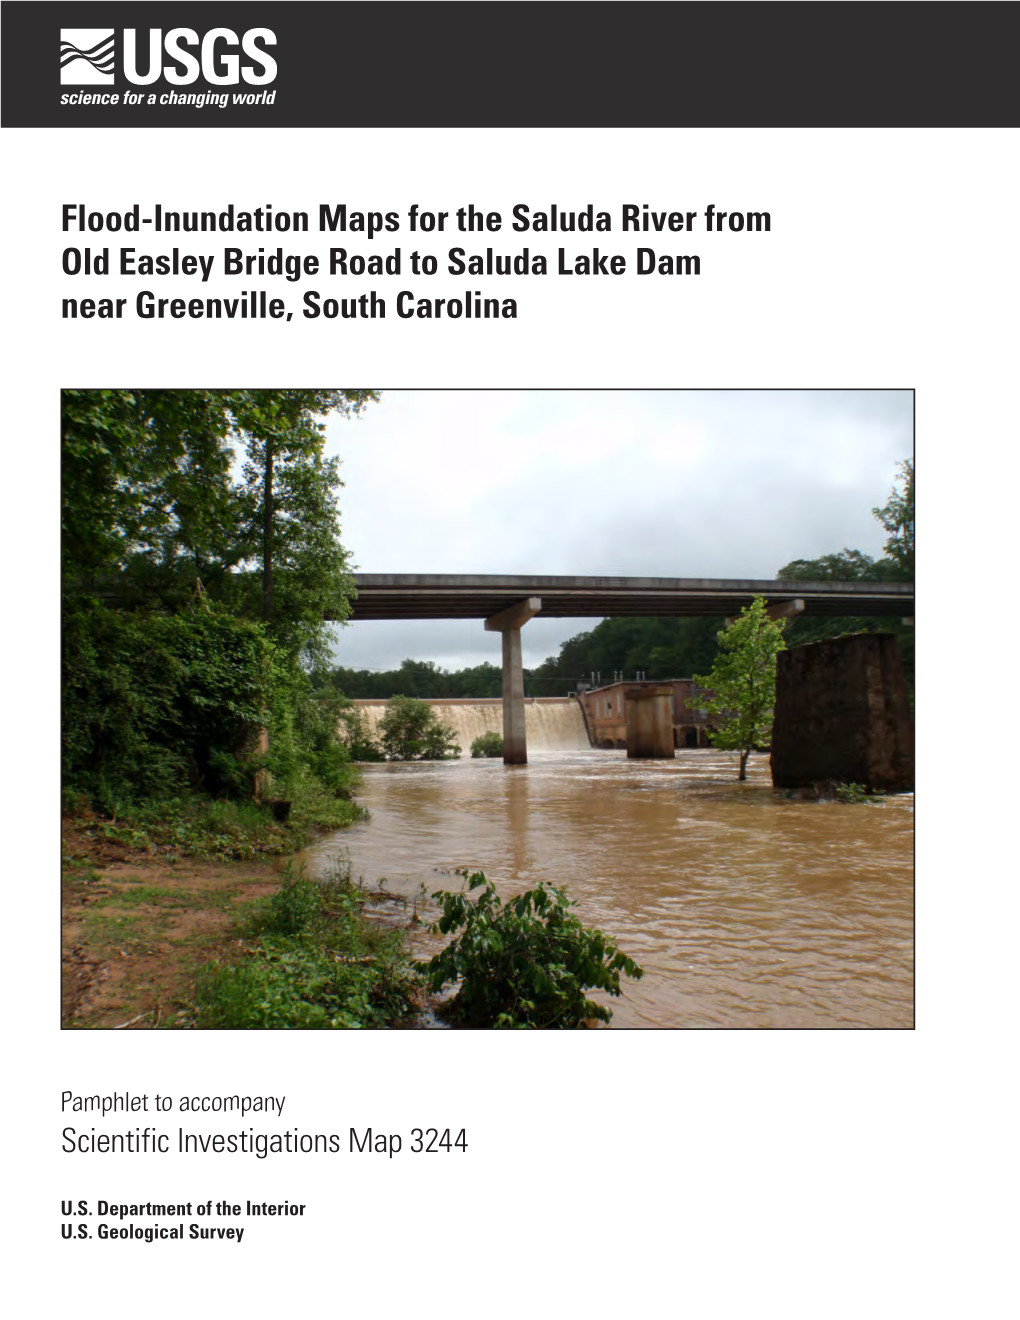 Flood-Inundation Maps for the Saluda River from Old Easley Bridge Road to Saluda Lake Dam Near Greenville, South Carolina